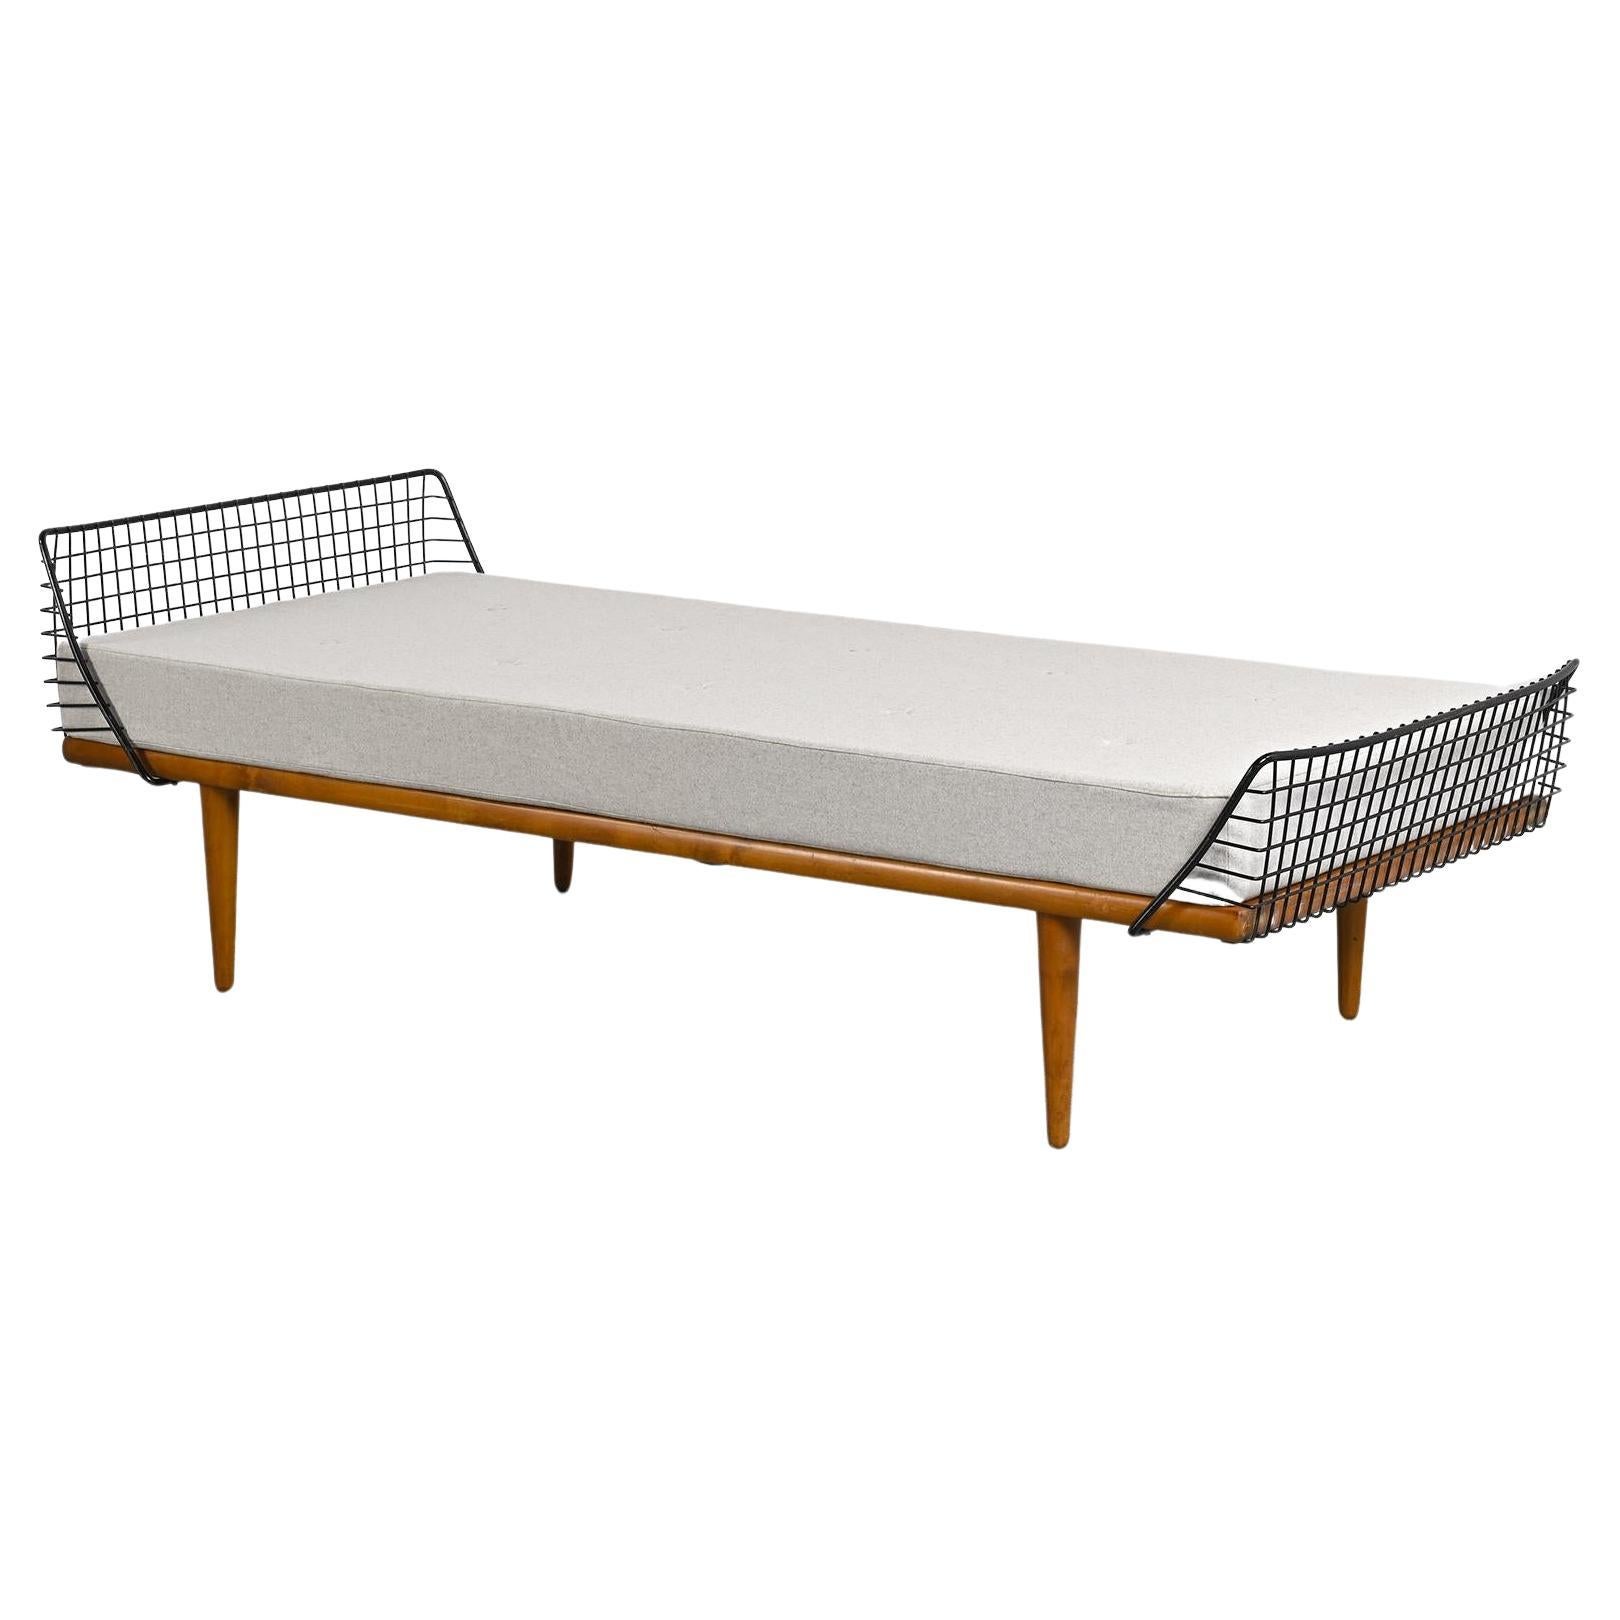  Teak Swedish Daybed by Triva Sweden, circa 1960  For Sale